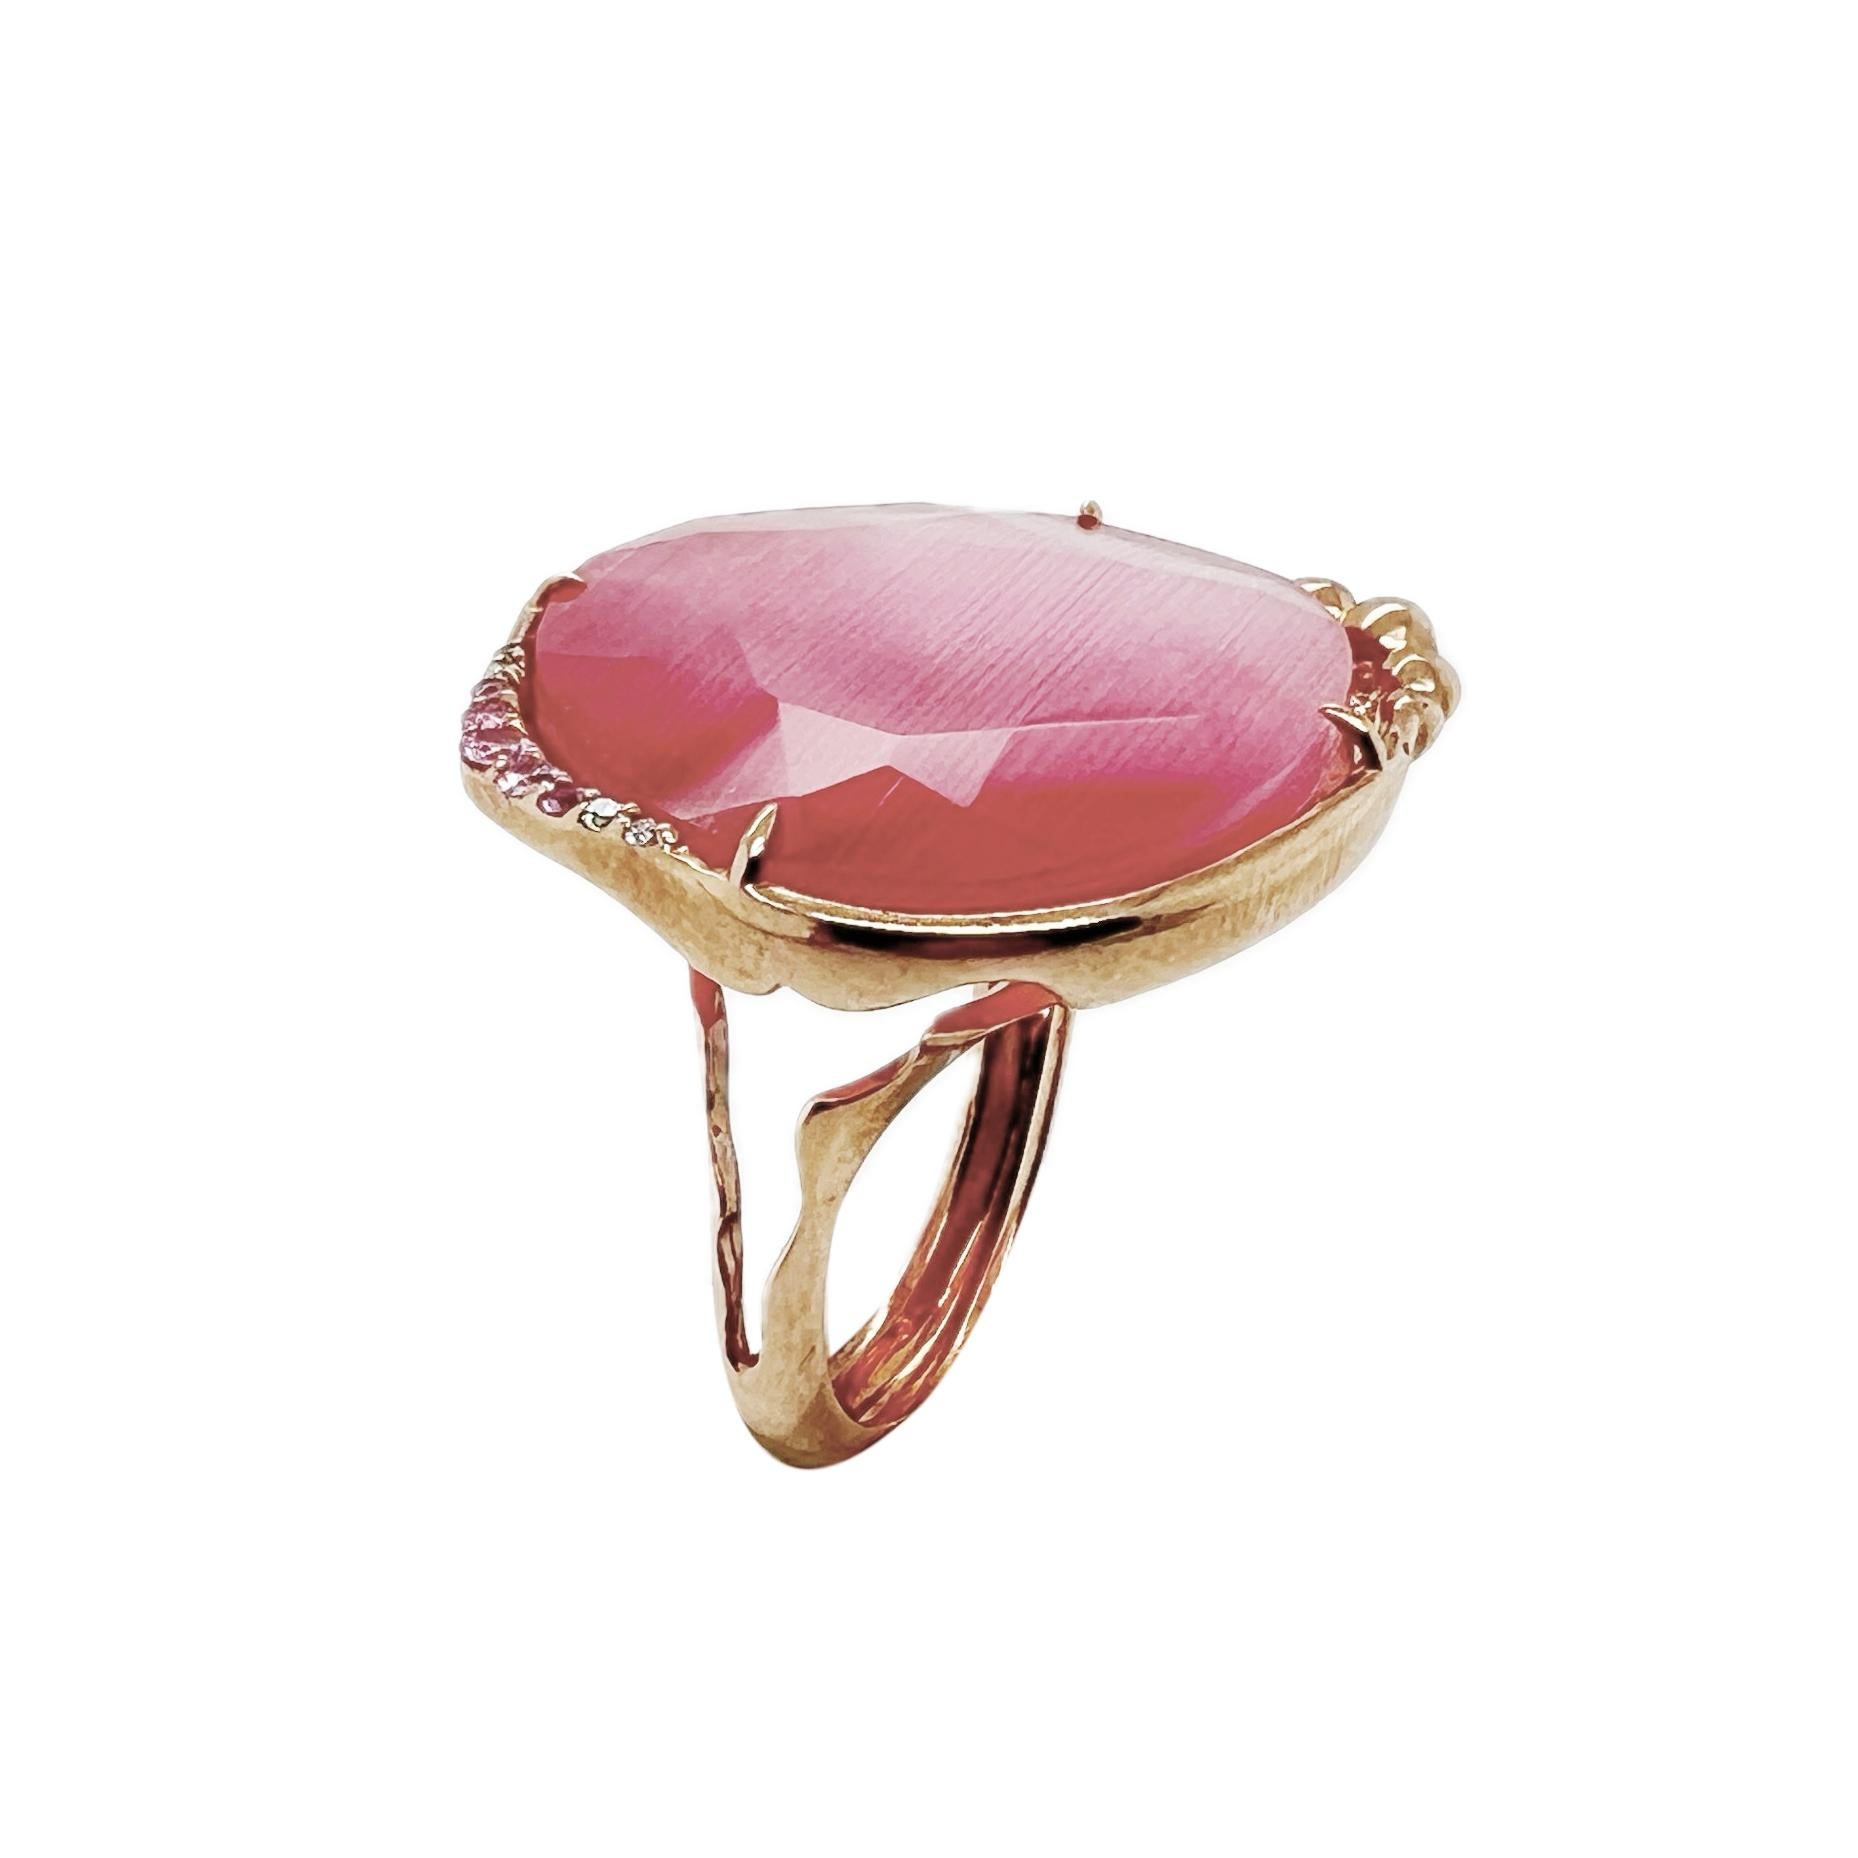 The Optic Chic Collection ring is a unique and contemporary piece crafted with the finest materials. It features an 9K gold body with white natural diamonds , and pink sapphires to add a touch of luxury and sophistication to the Optic Fiber&Rock